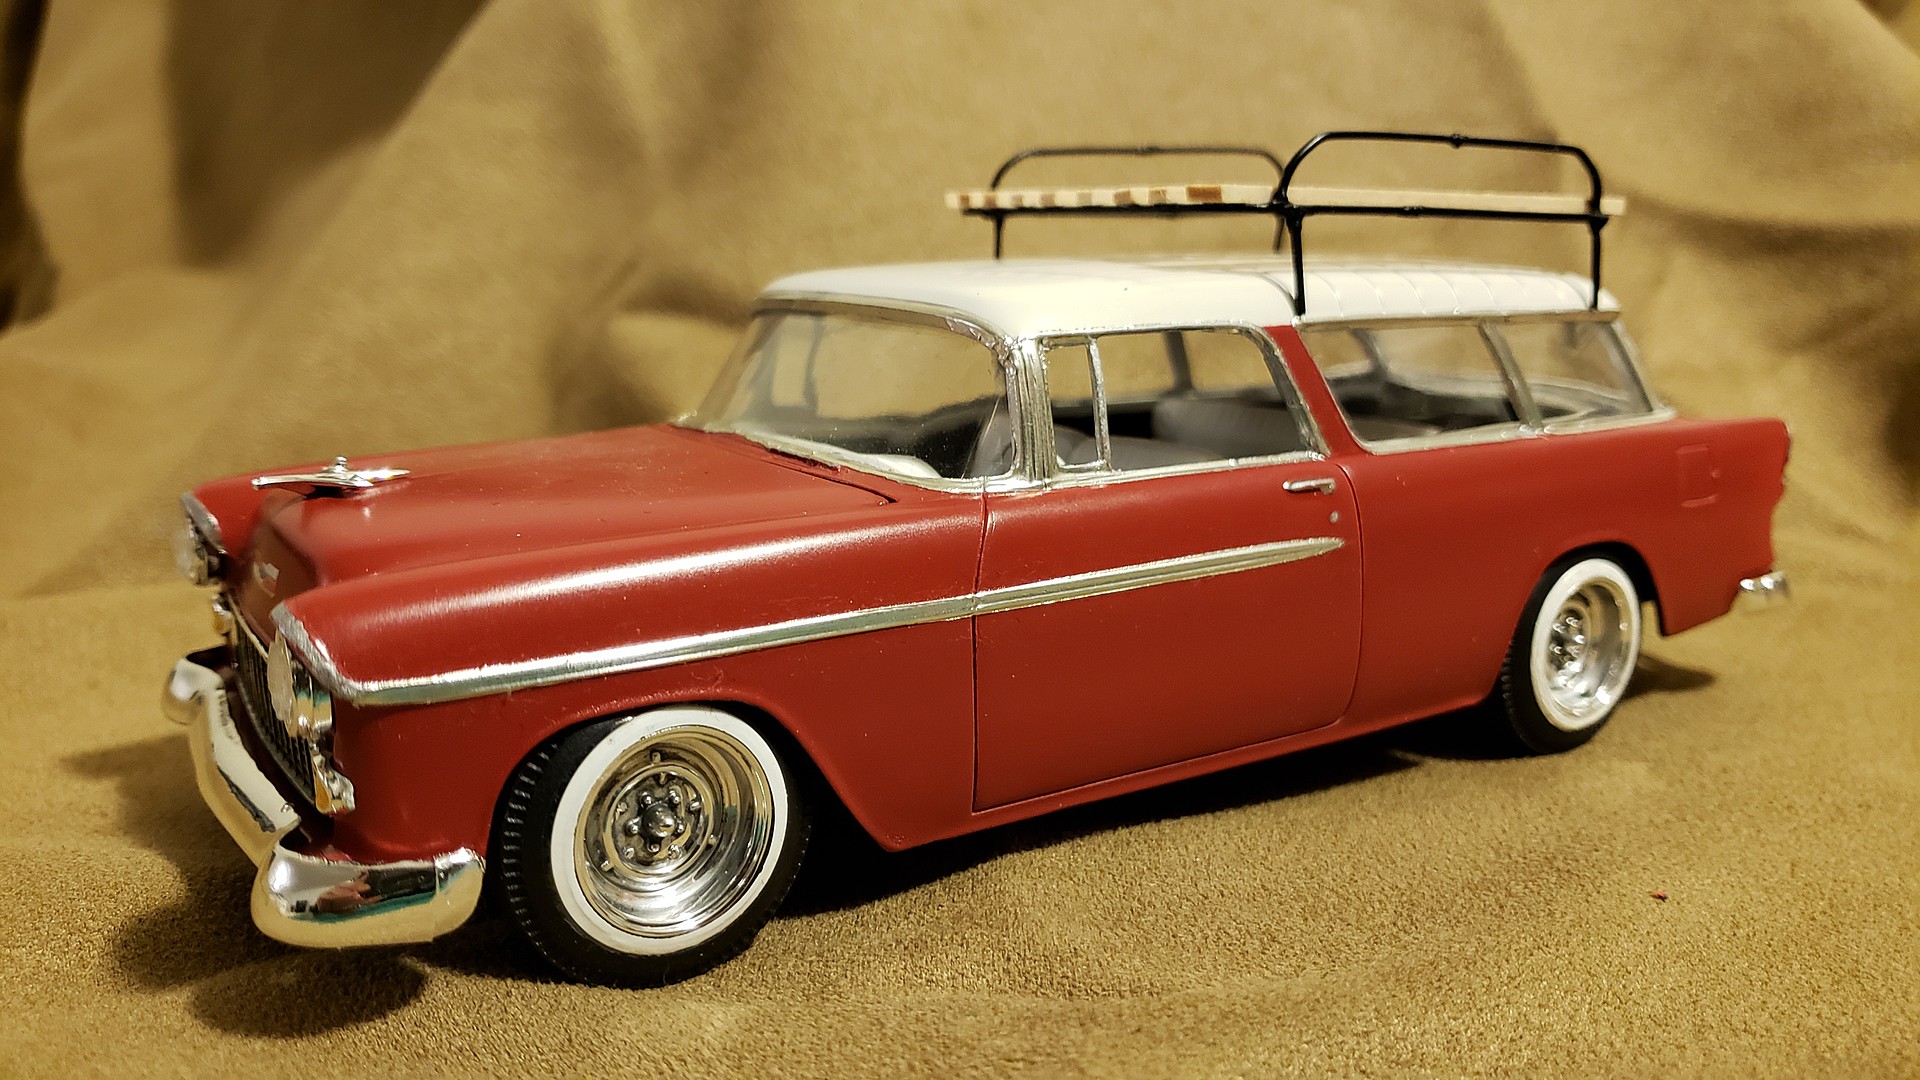 New 1/43 Diecast Black 1957 Chevrolet/ Chevy Nomad for MTH Lionel & K-Line 